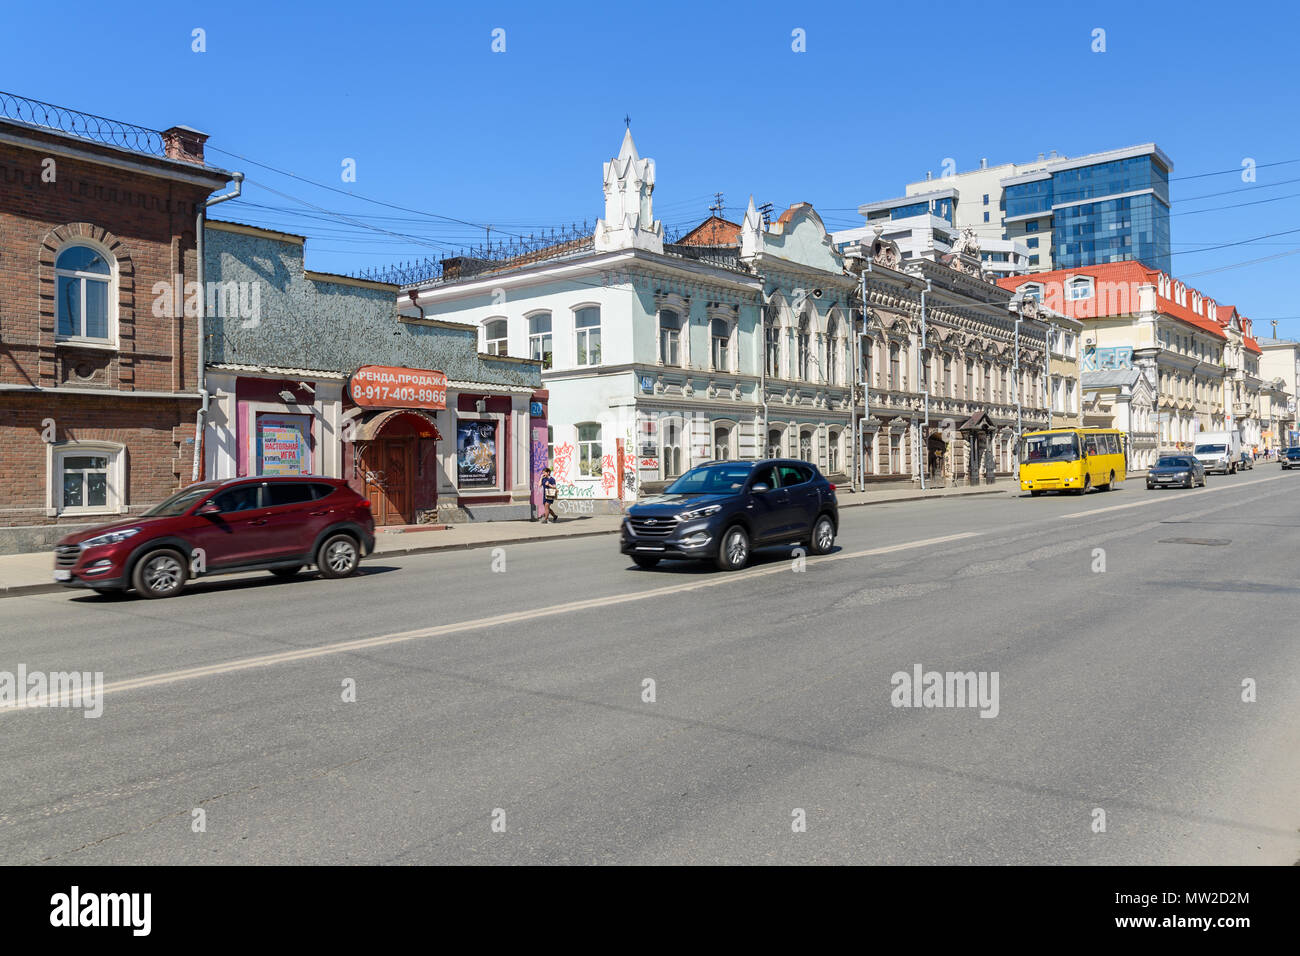 Yekaterinburg, Russia - May 23, 2018: View of 8th March Street. Stock Photo